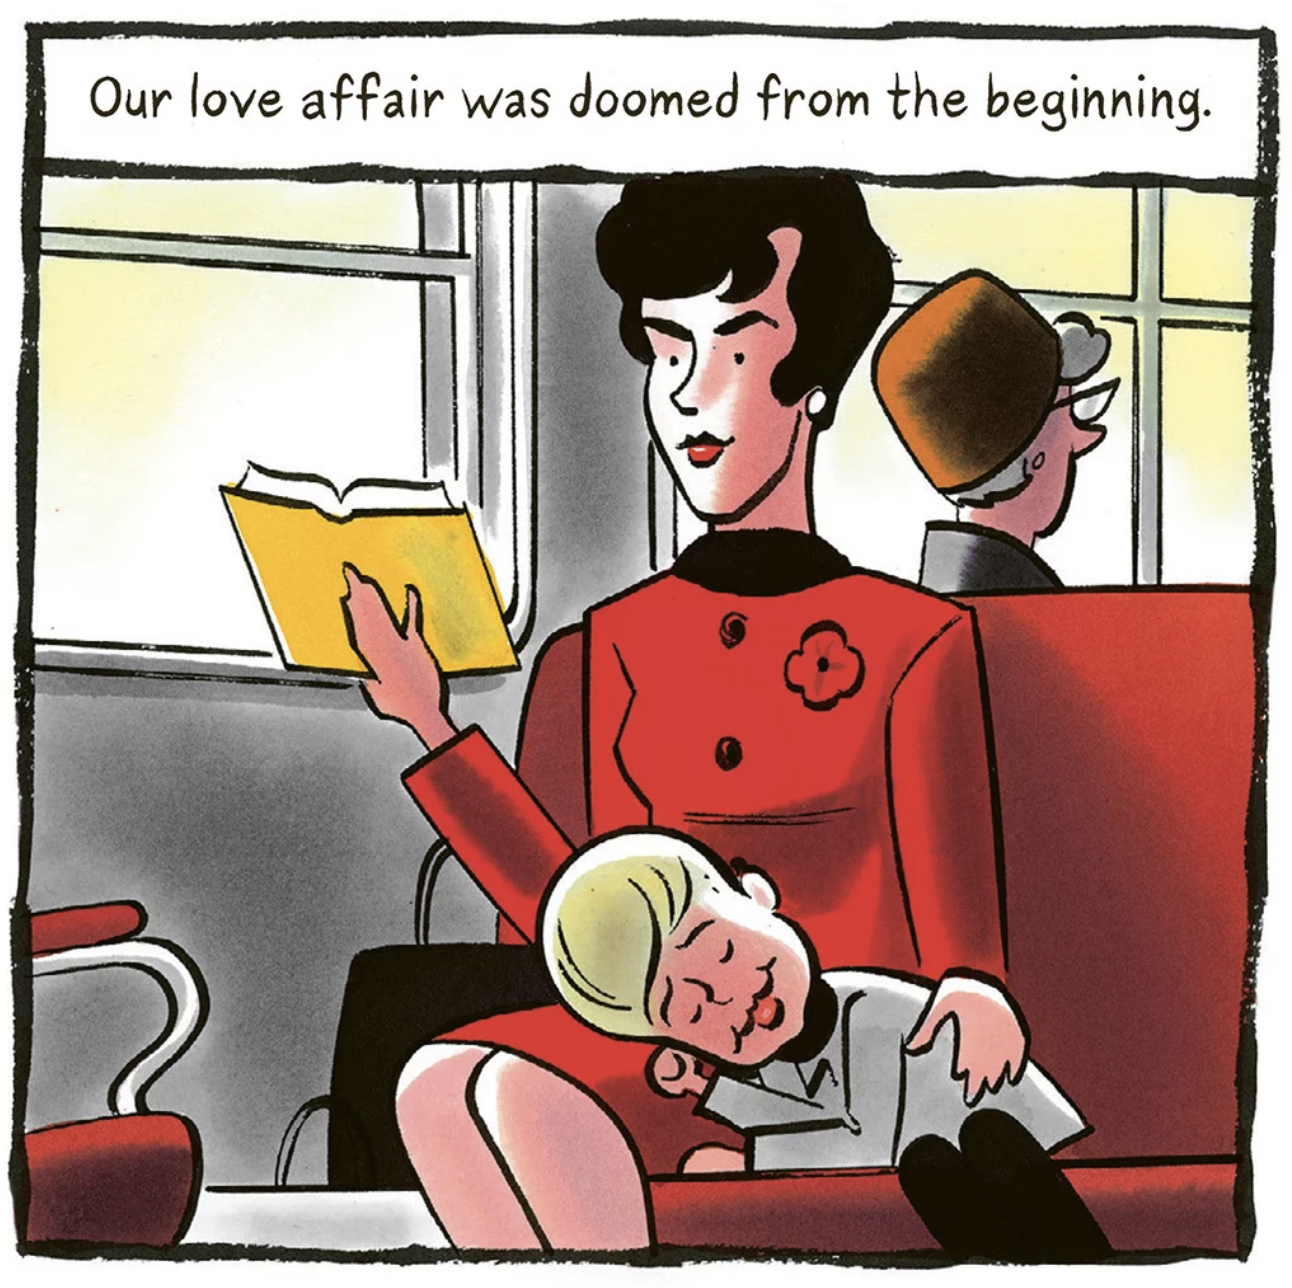 An illustration of a woman reading a book on a train, with a small boy curled up next to her.